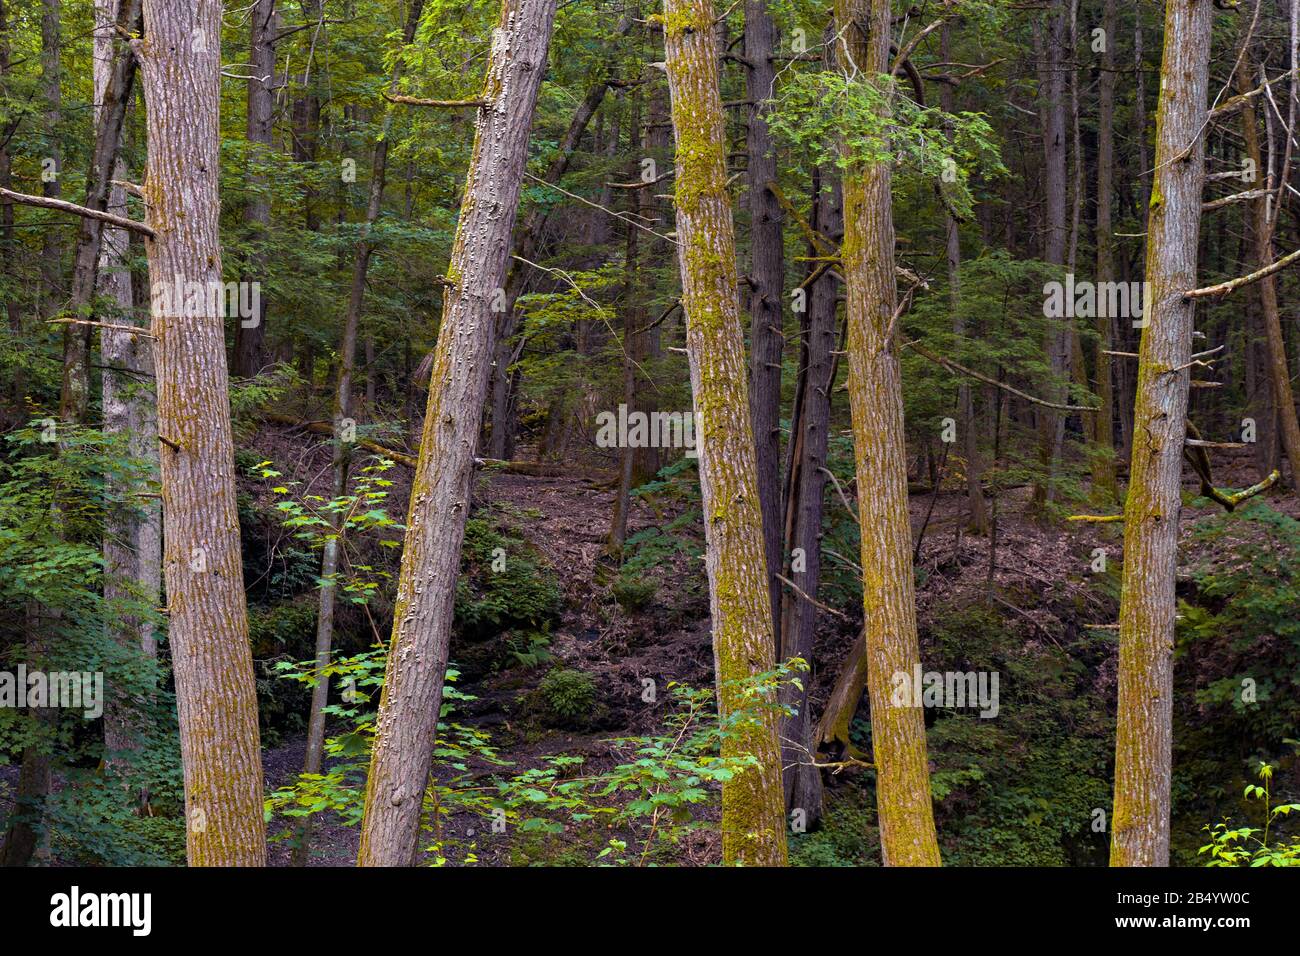 The hemlock ravine forest could be one of the most endangered ecosystem in eastern North America due to the non-native hemlock woolly adelgid (Adelges Stock Photo